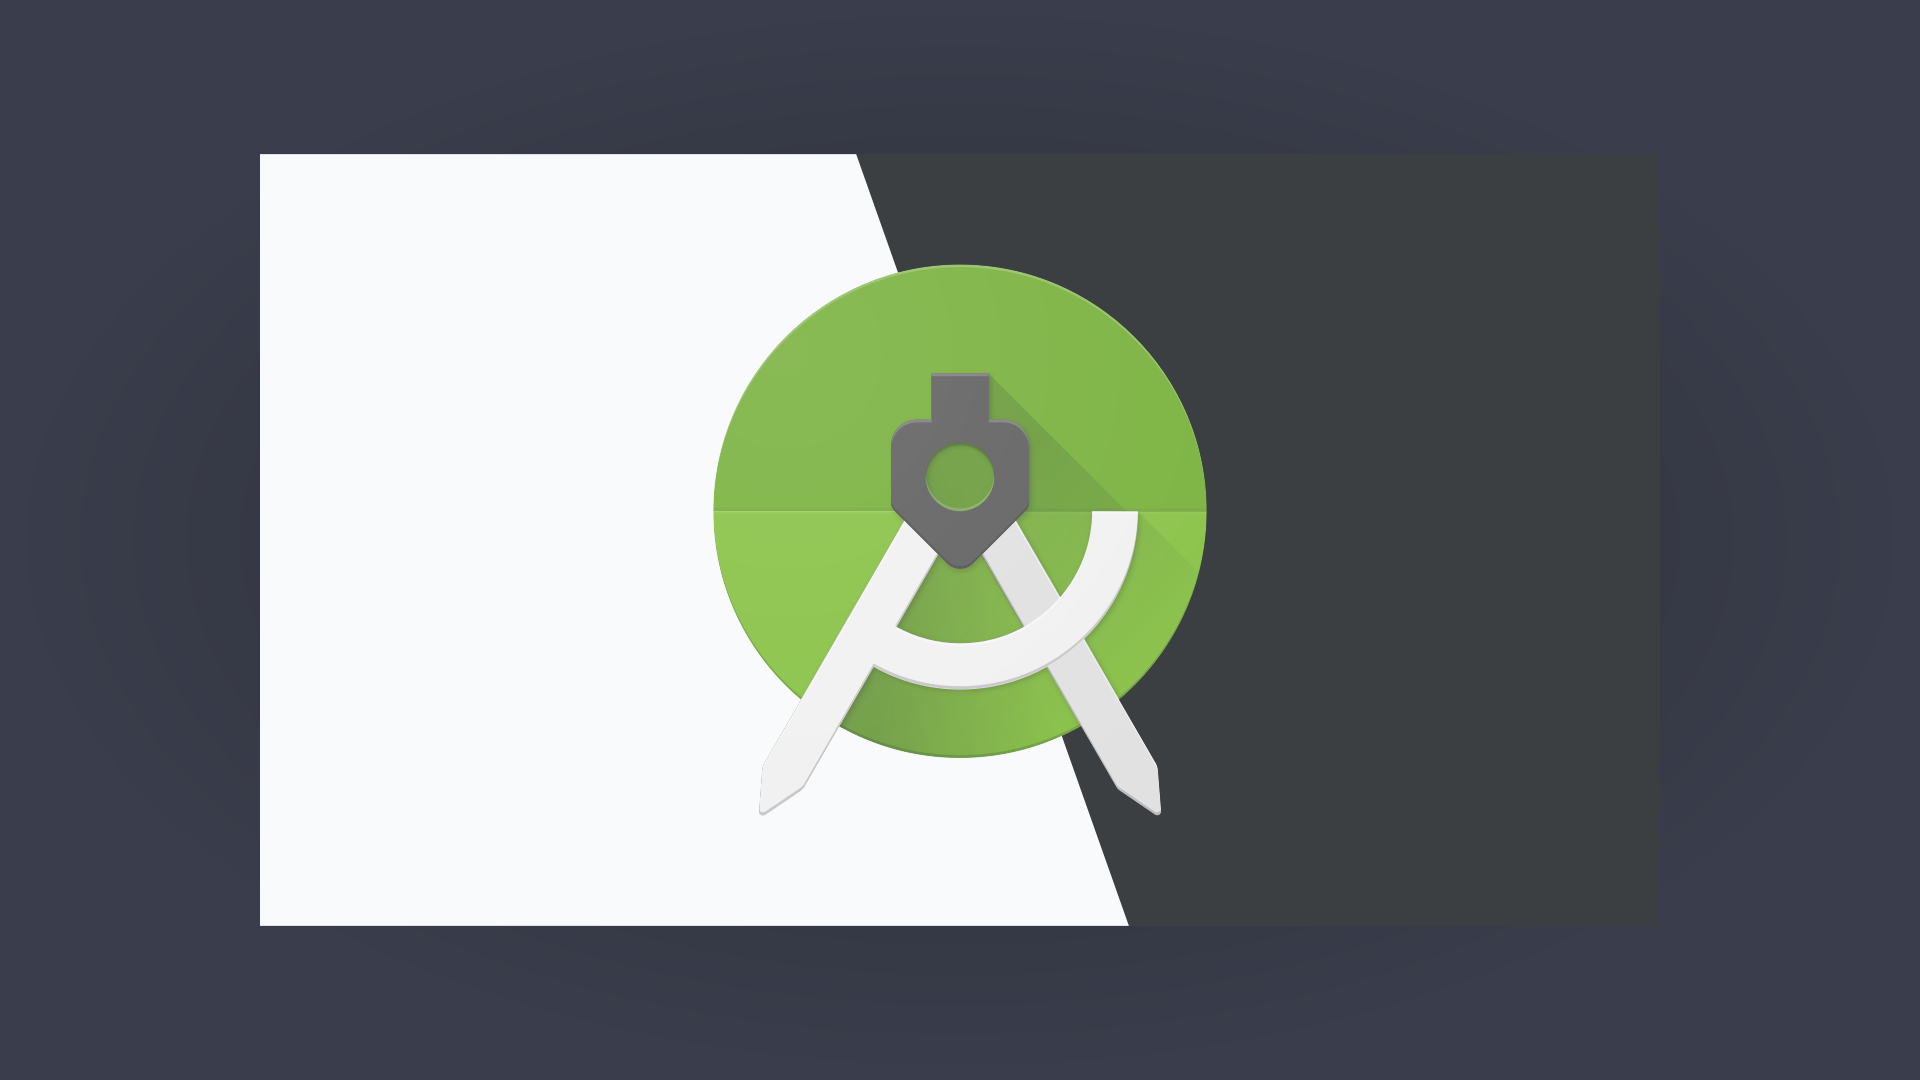 How to Change The Theme in Android Studio